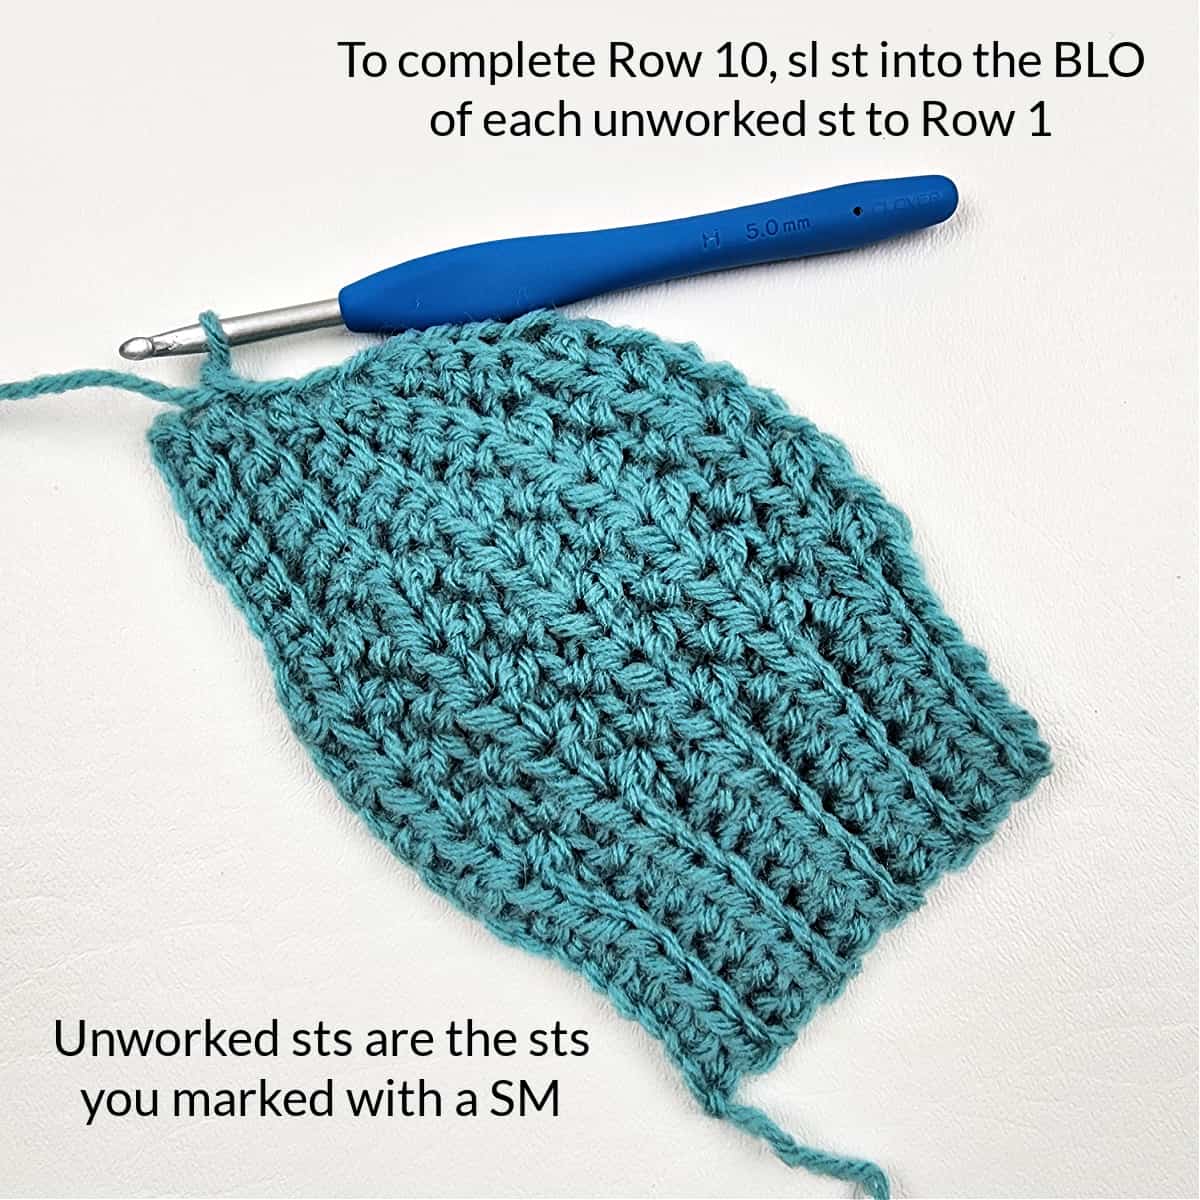 How to finish up a section of crochet short rows in the crown of a hat.